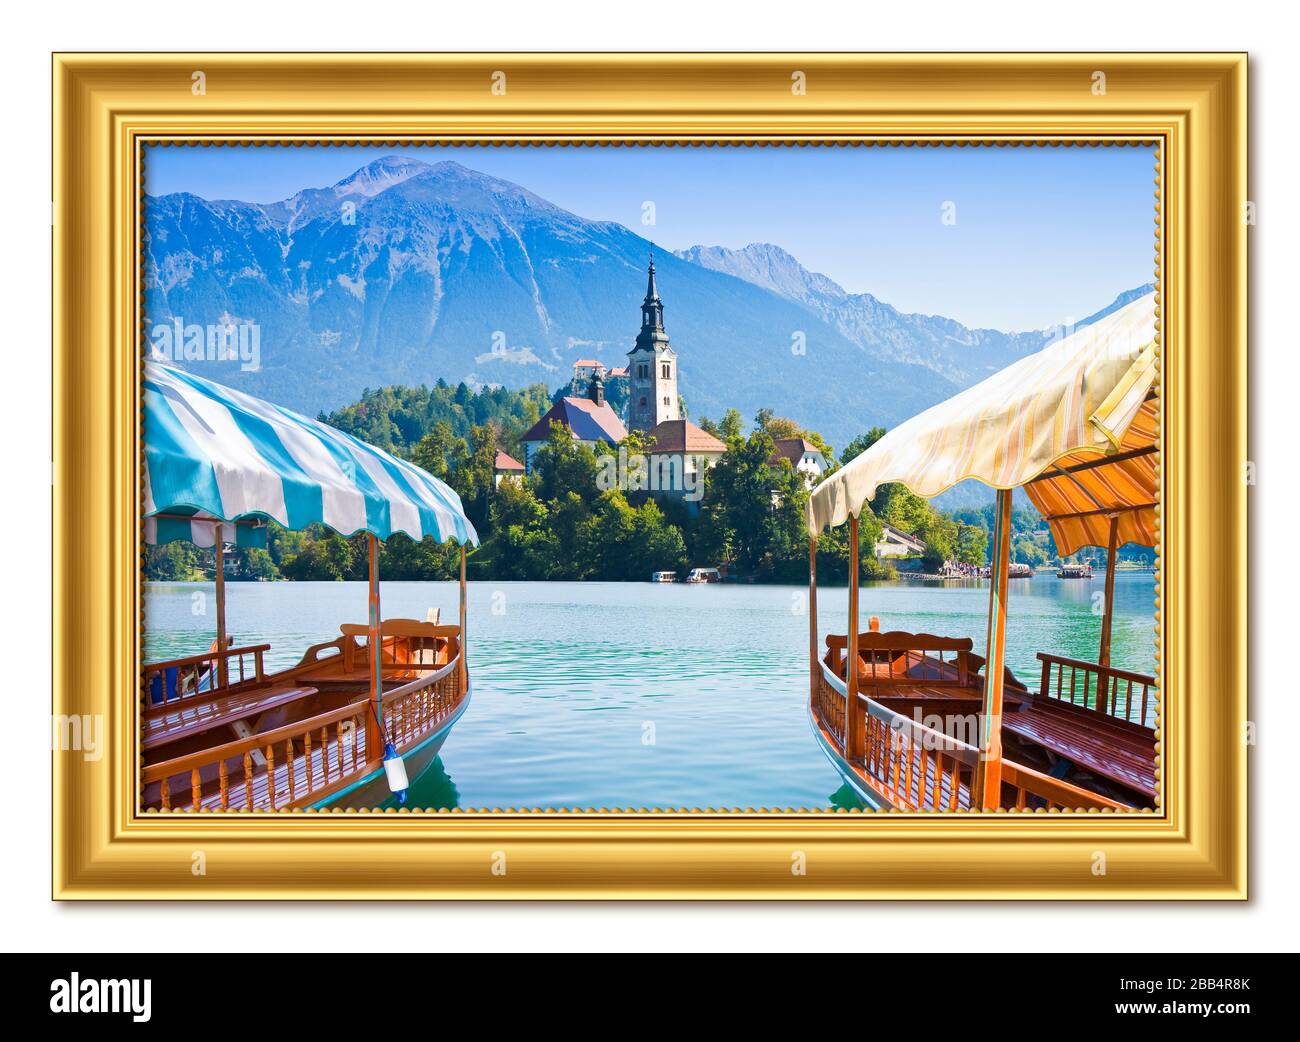 Typical wooden boats, in slovenian call 'Pletna', in the Lake Bled, the most famous lake in Slovenia with the island of the church (Europe - Slovenia) Stock Photo